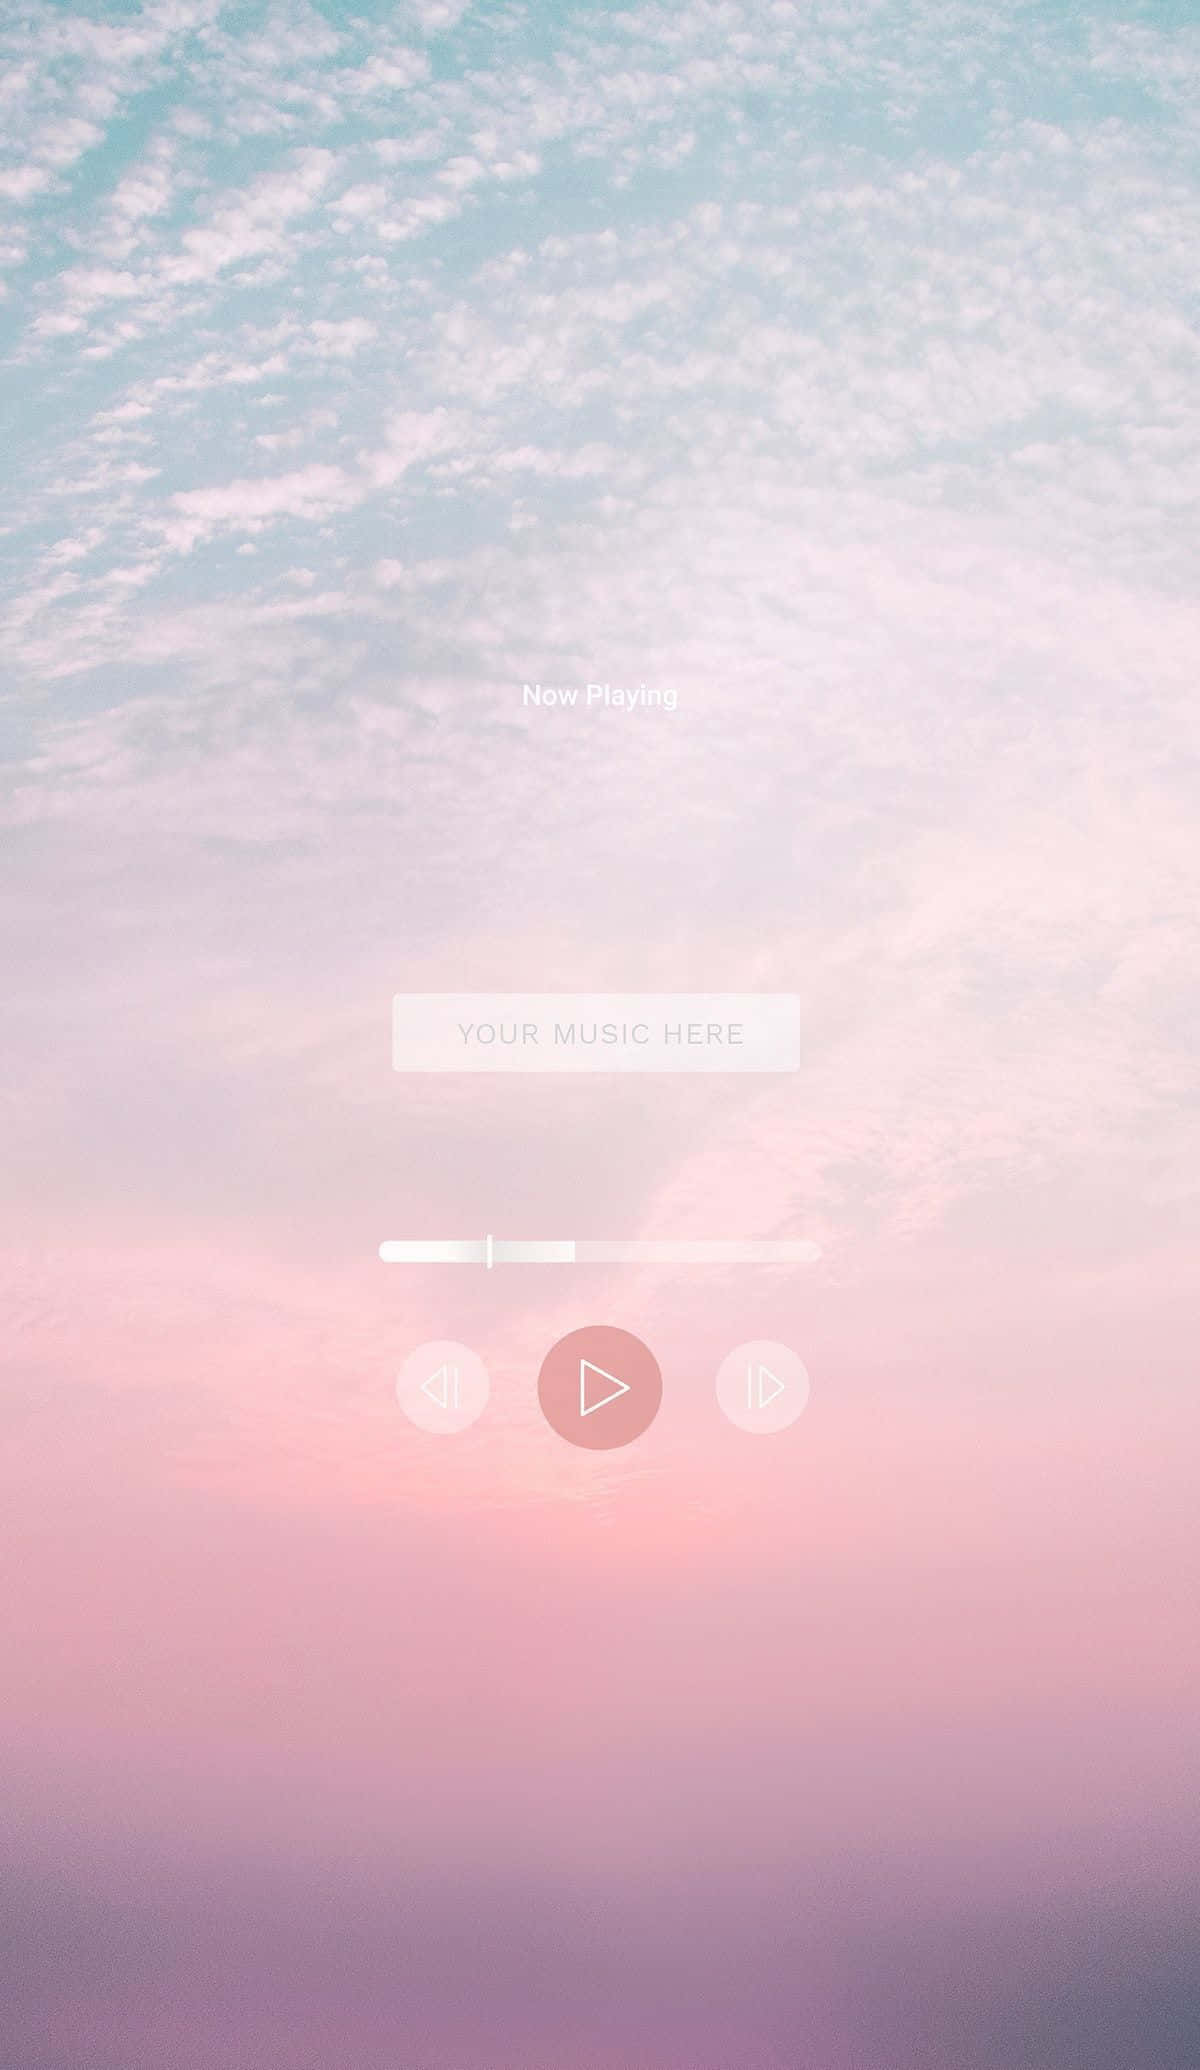 A Pink Sky With Clouds And A Blue Sky